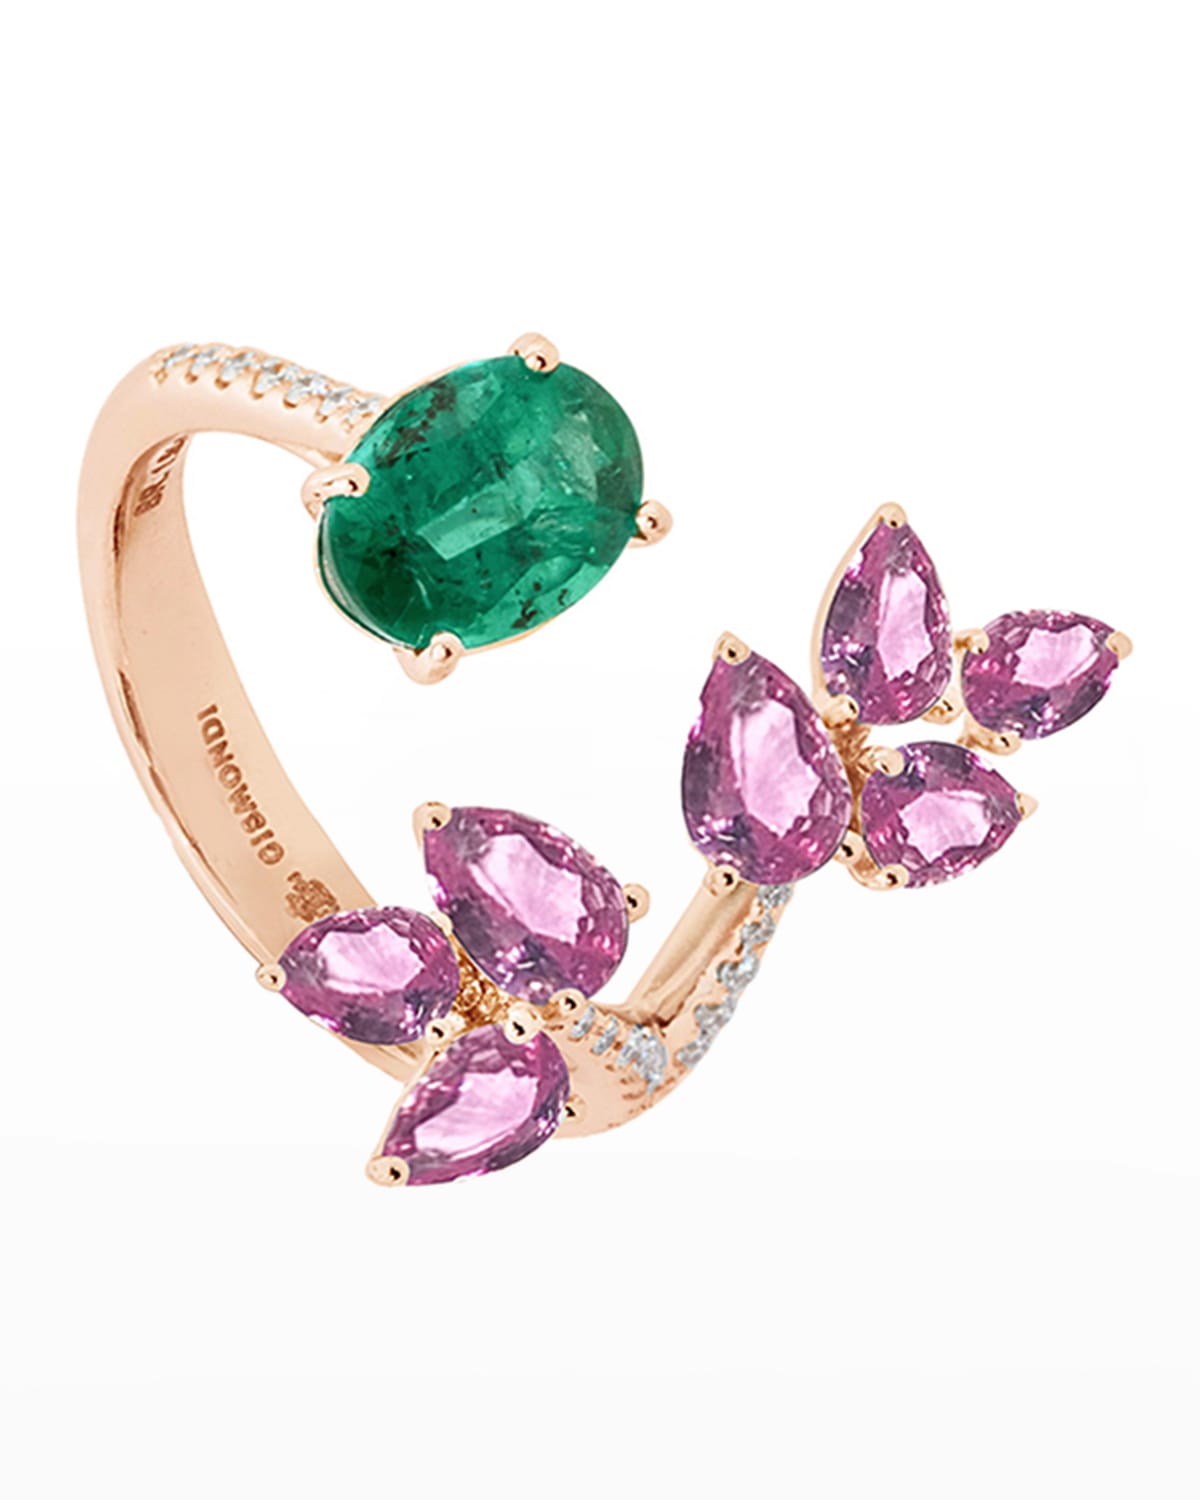 18k Rose Gold Open Emerald-End Ring with Diamonds and Sapphires, Size 7